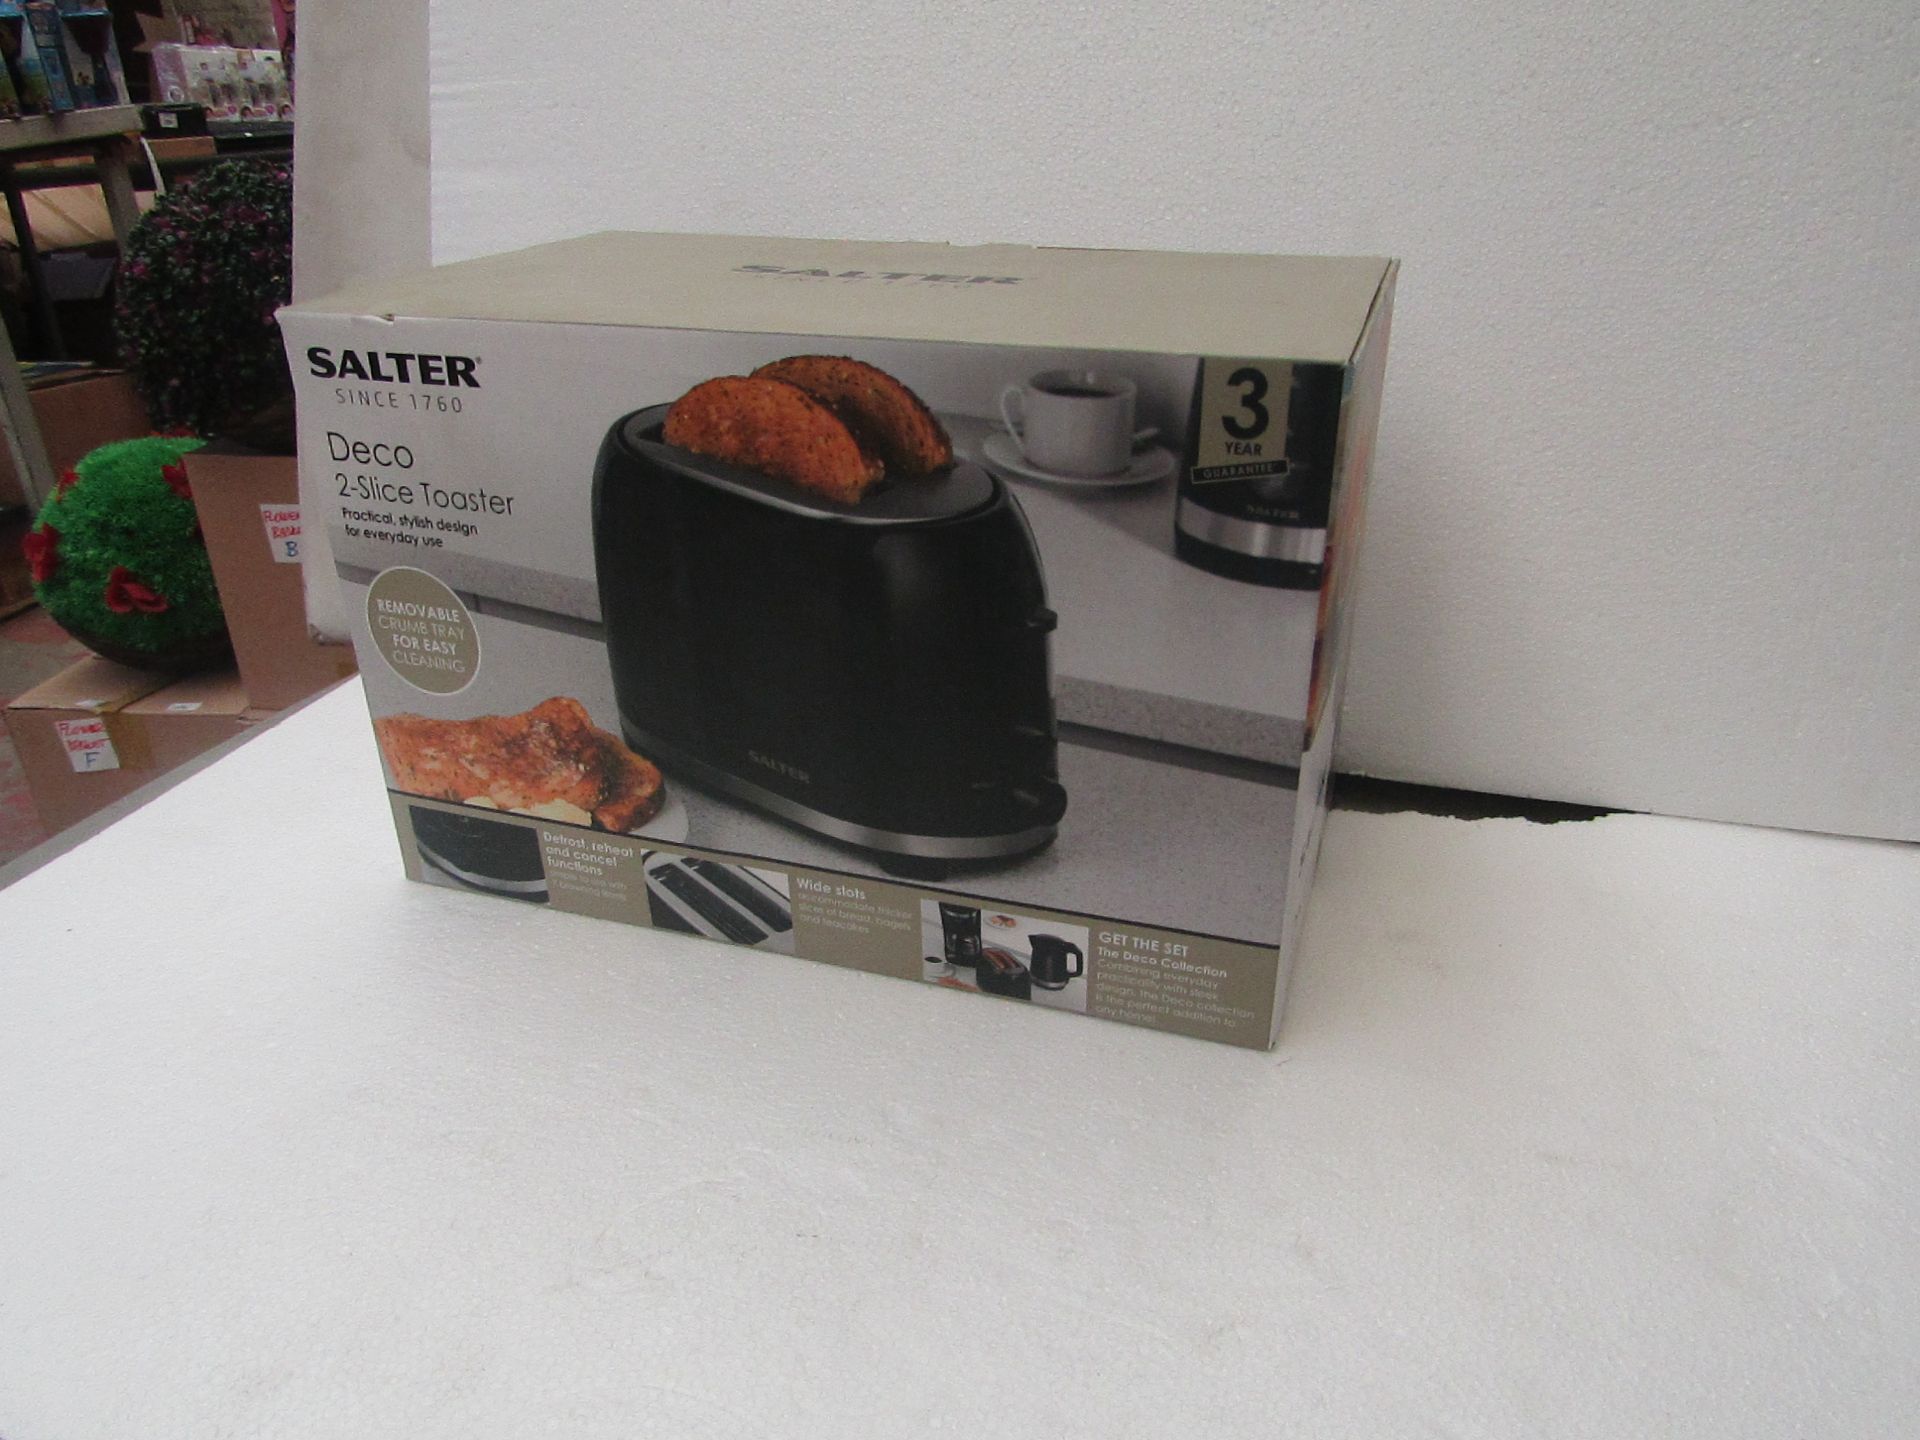 Salter Deco 2 Slice Toaster With Removable Crumb Tray - Refurbished & Boxed - RRP £19.99. - Image 2 of 2